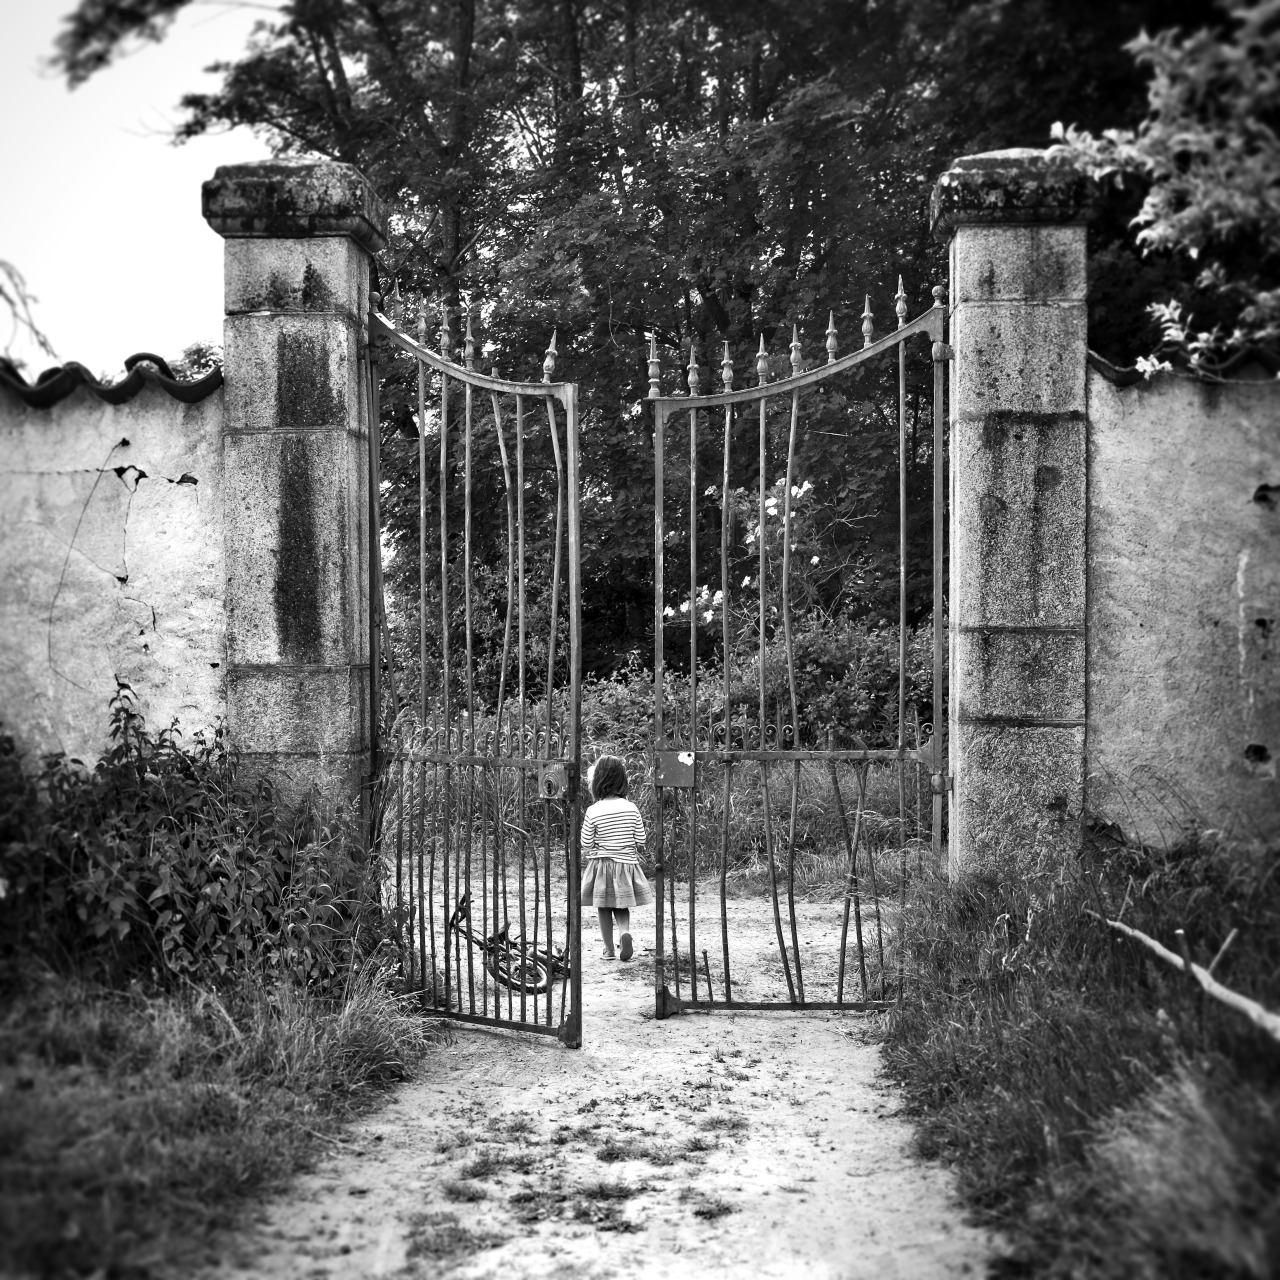 ceden-blr:Beyond the garden gate. France, 2015.
Thank you for your submission!~The Photographers Society